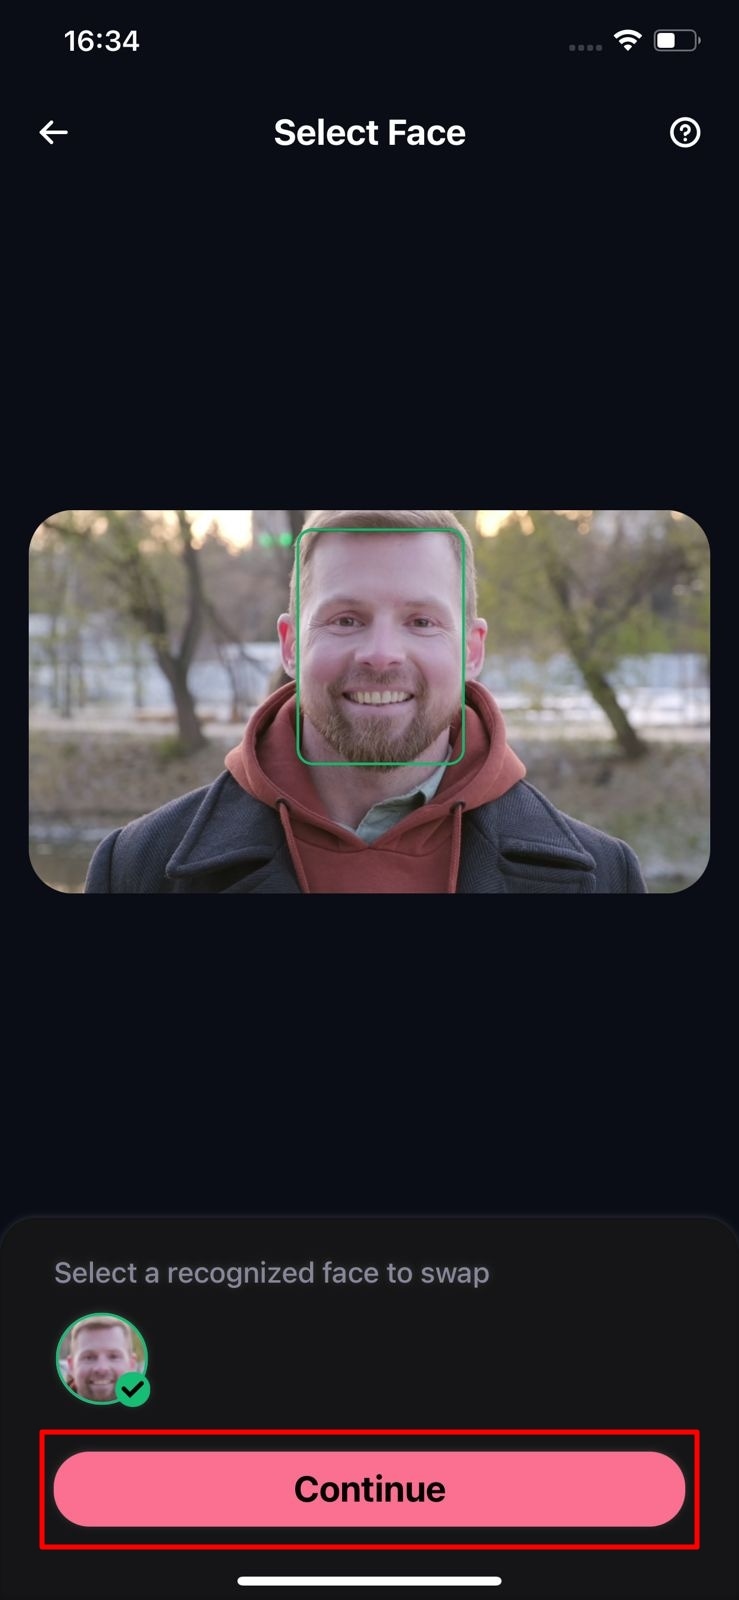 select face from video